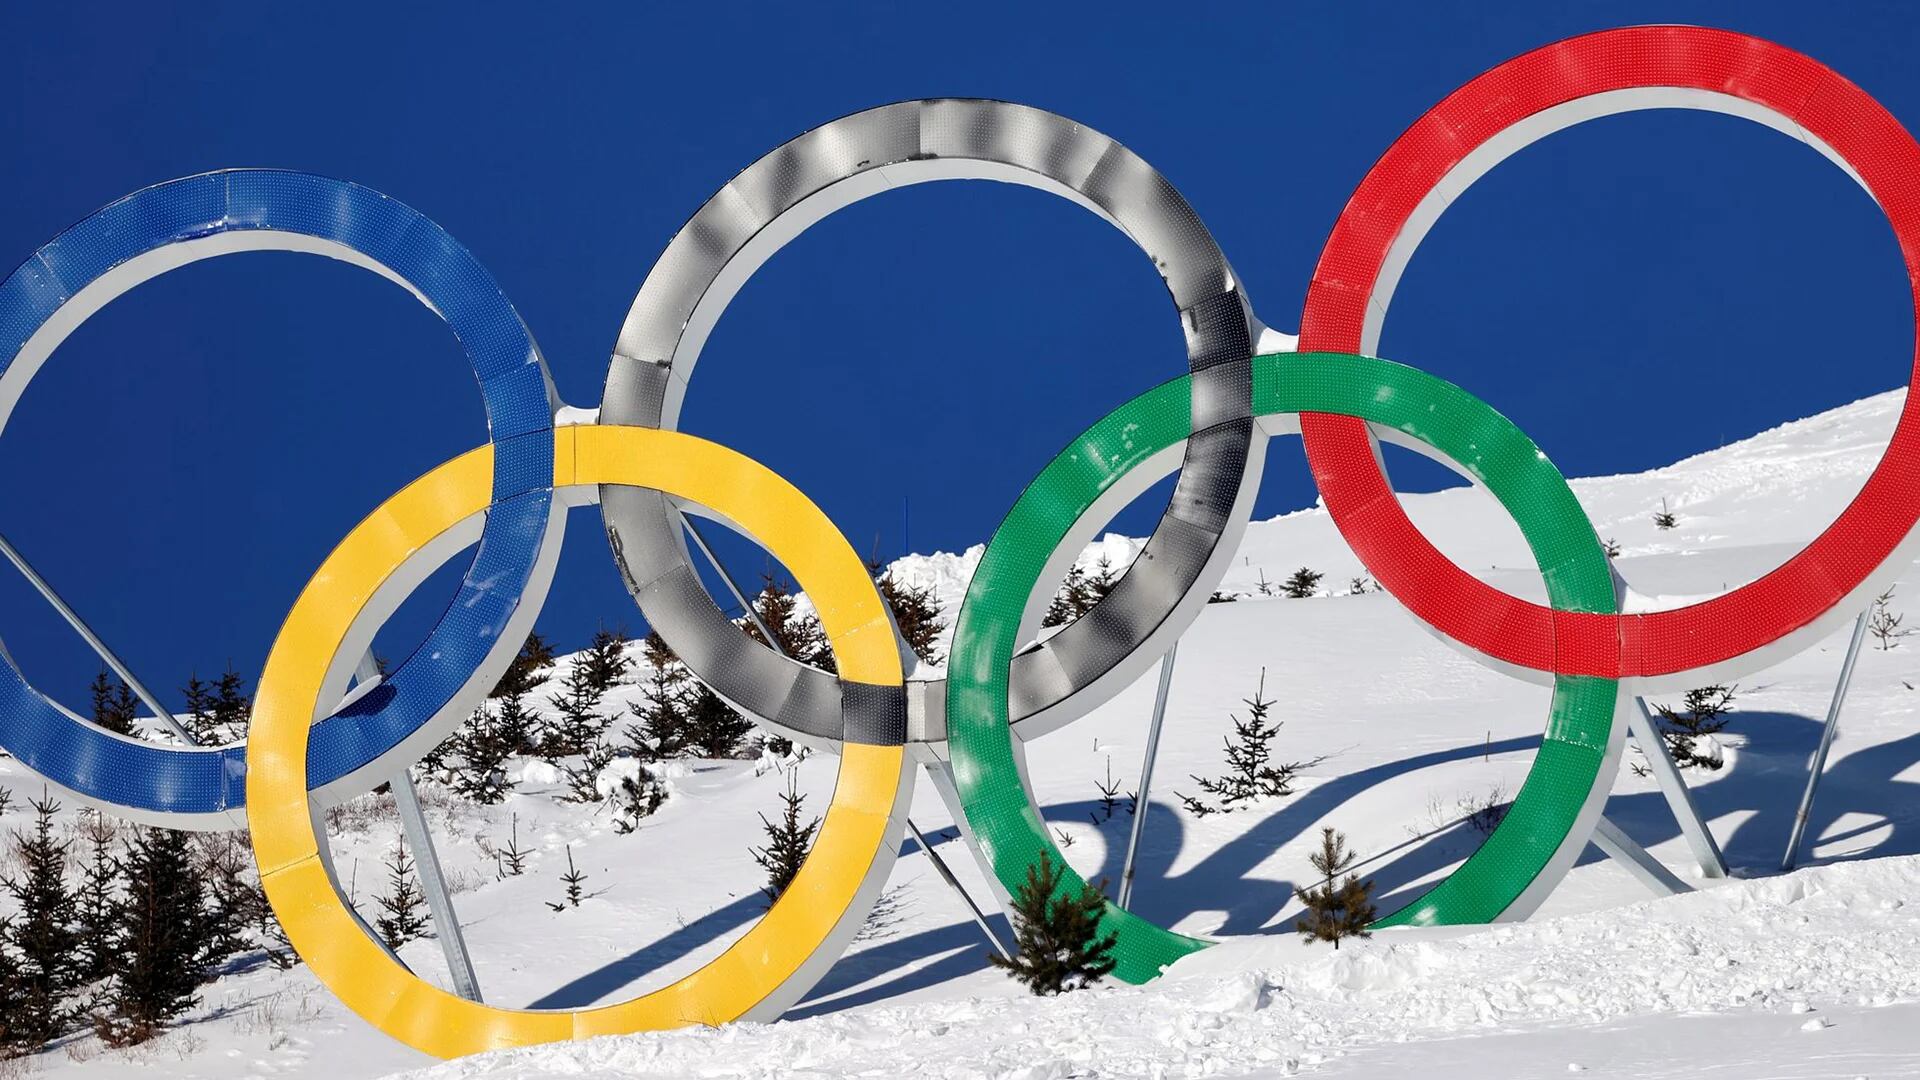 The race to the 2030 Winter Games: the IOC revealed that there are six candidates amidst many questions